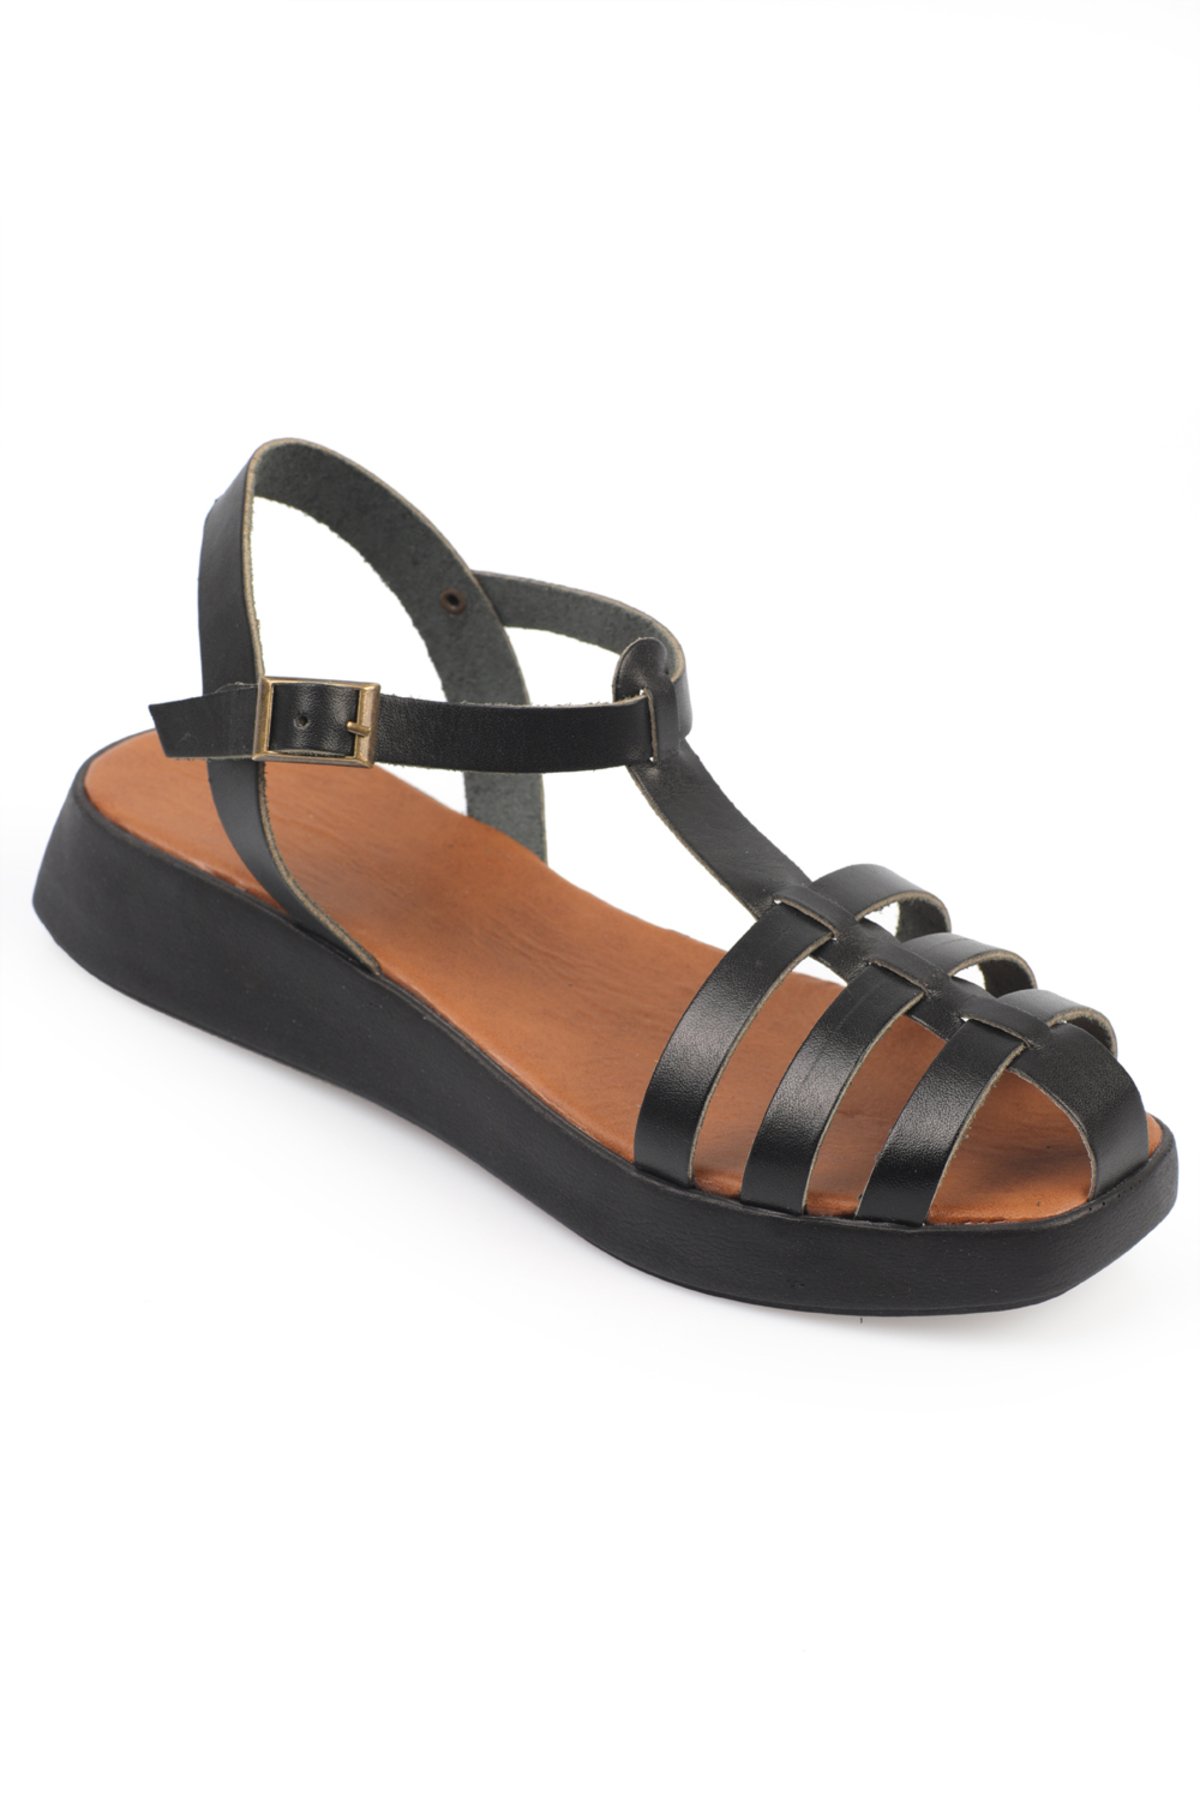 Levně Capone Outfitters Women's Gladiator Band Wedge Heels Leather Sandals